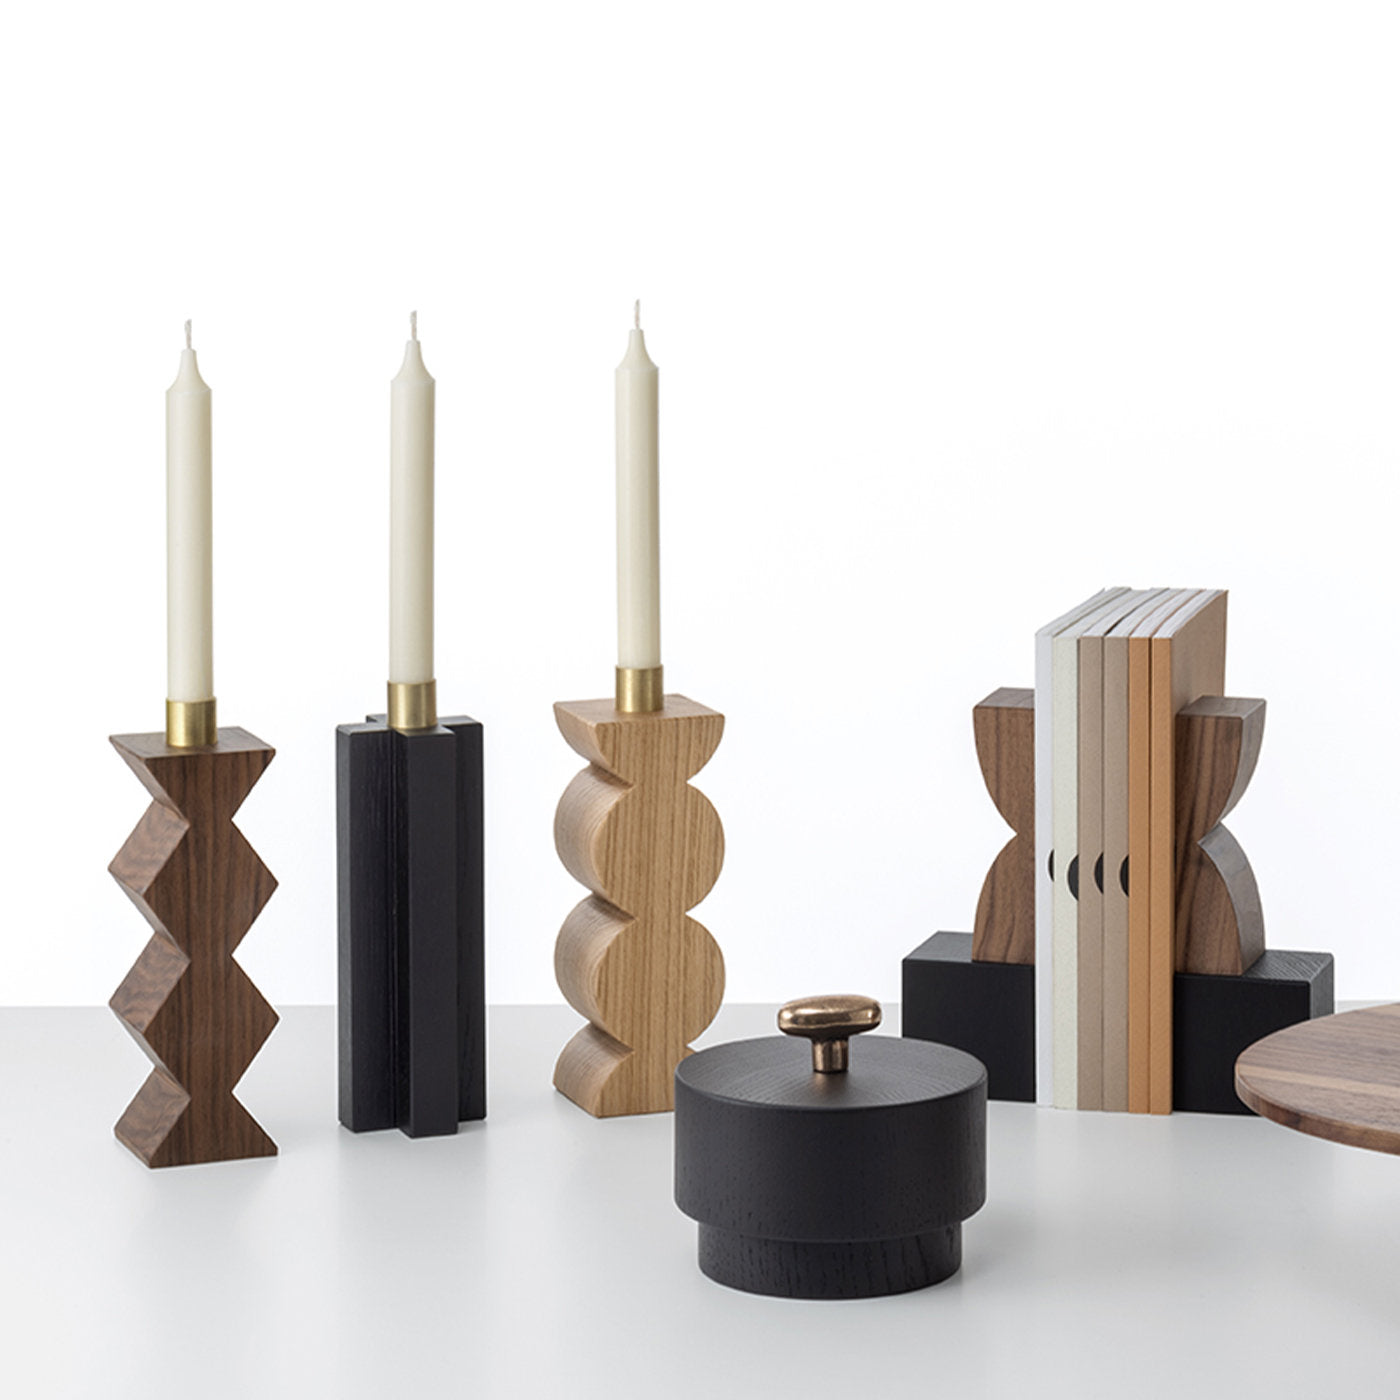 Constantin Cross Candle Holder by Agustina Bottoni - Alternative view 3